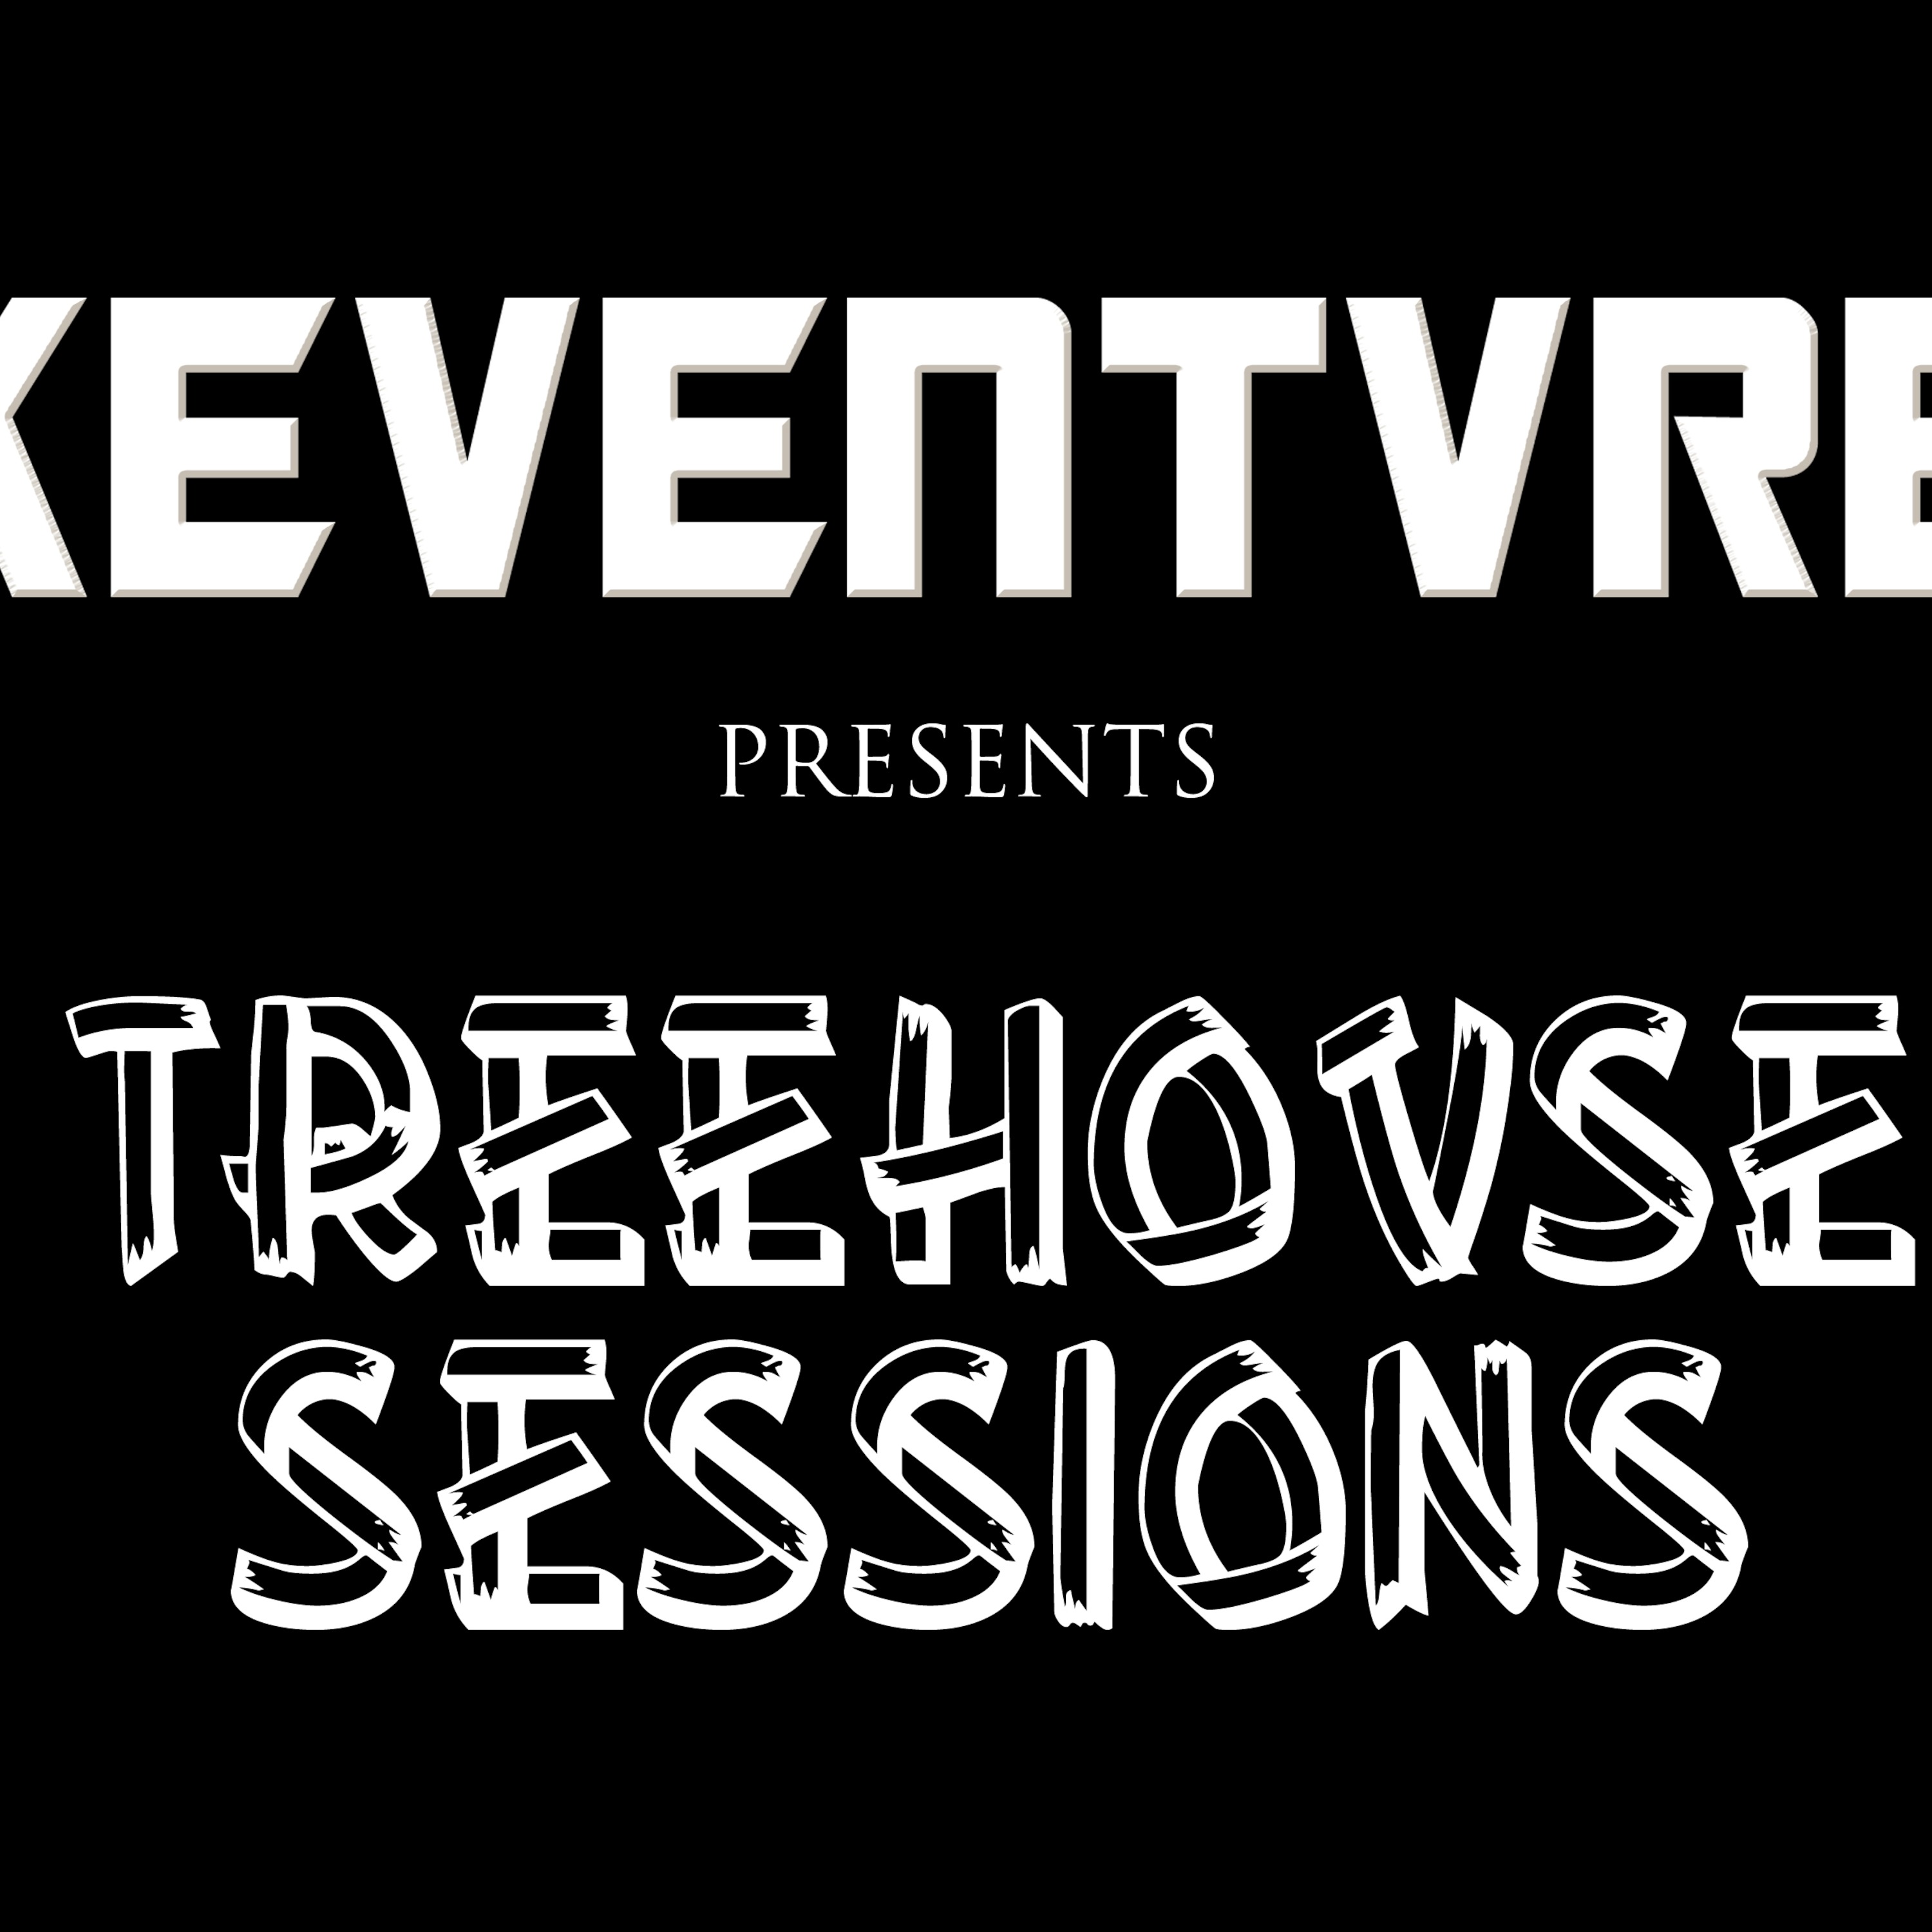 Treehovse Sessions by Keventvre